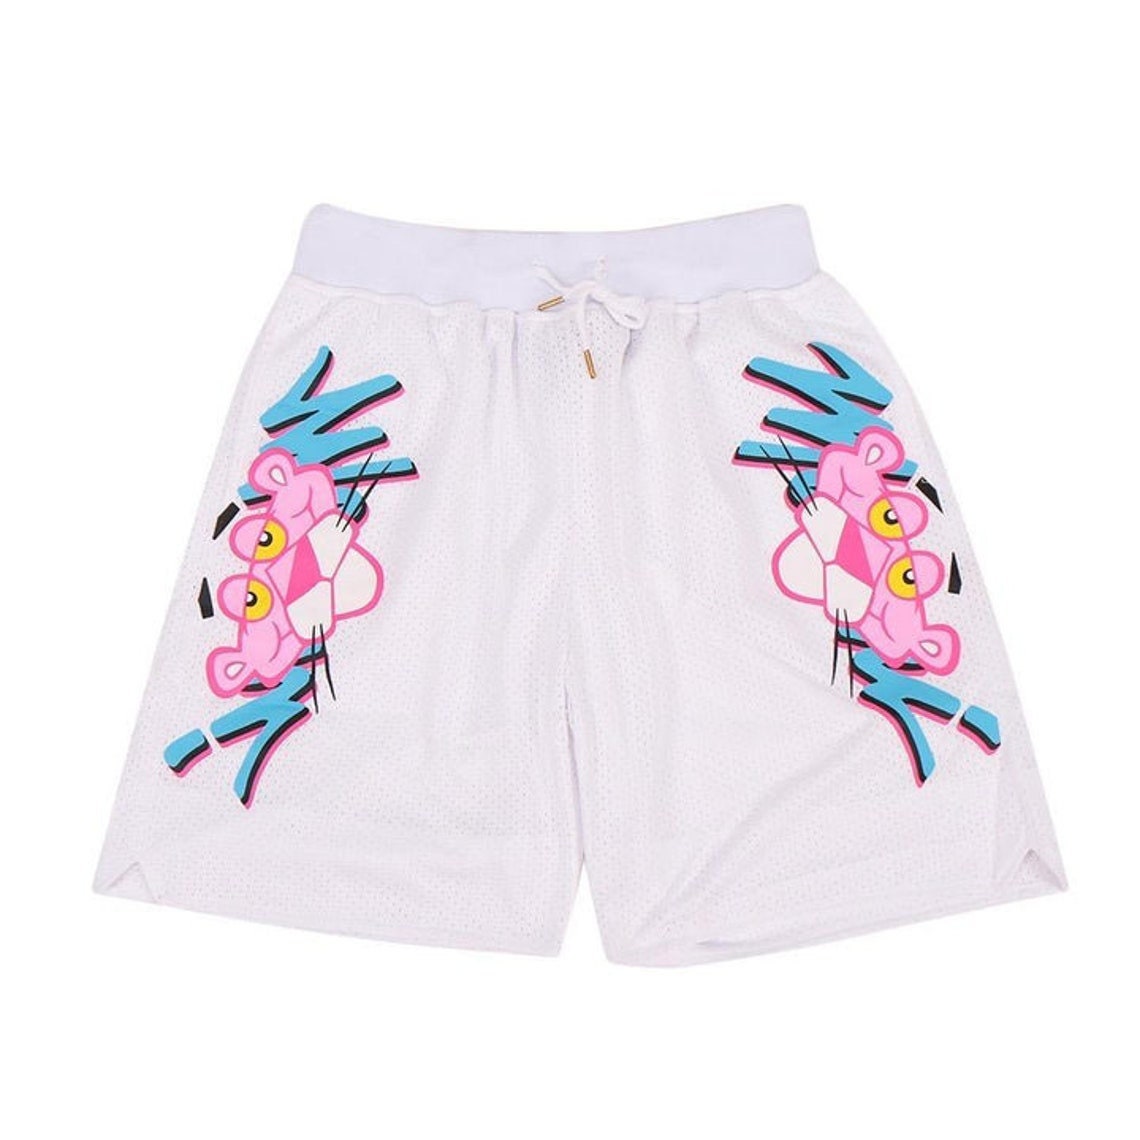 golf Raad eens behalve voor Pink Panther Miami Themed White Basketball Shorts Unisex - Etsy